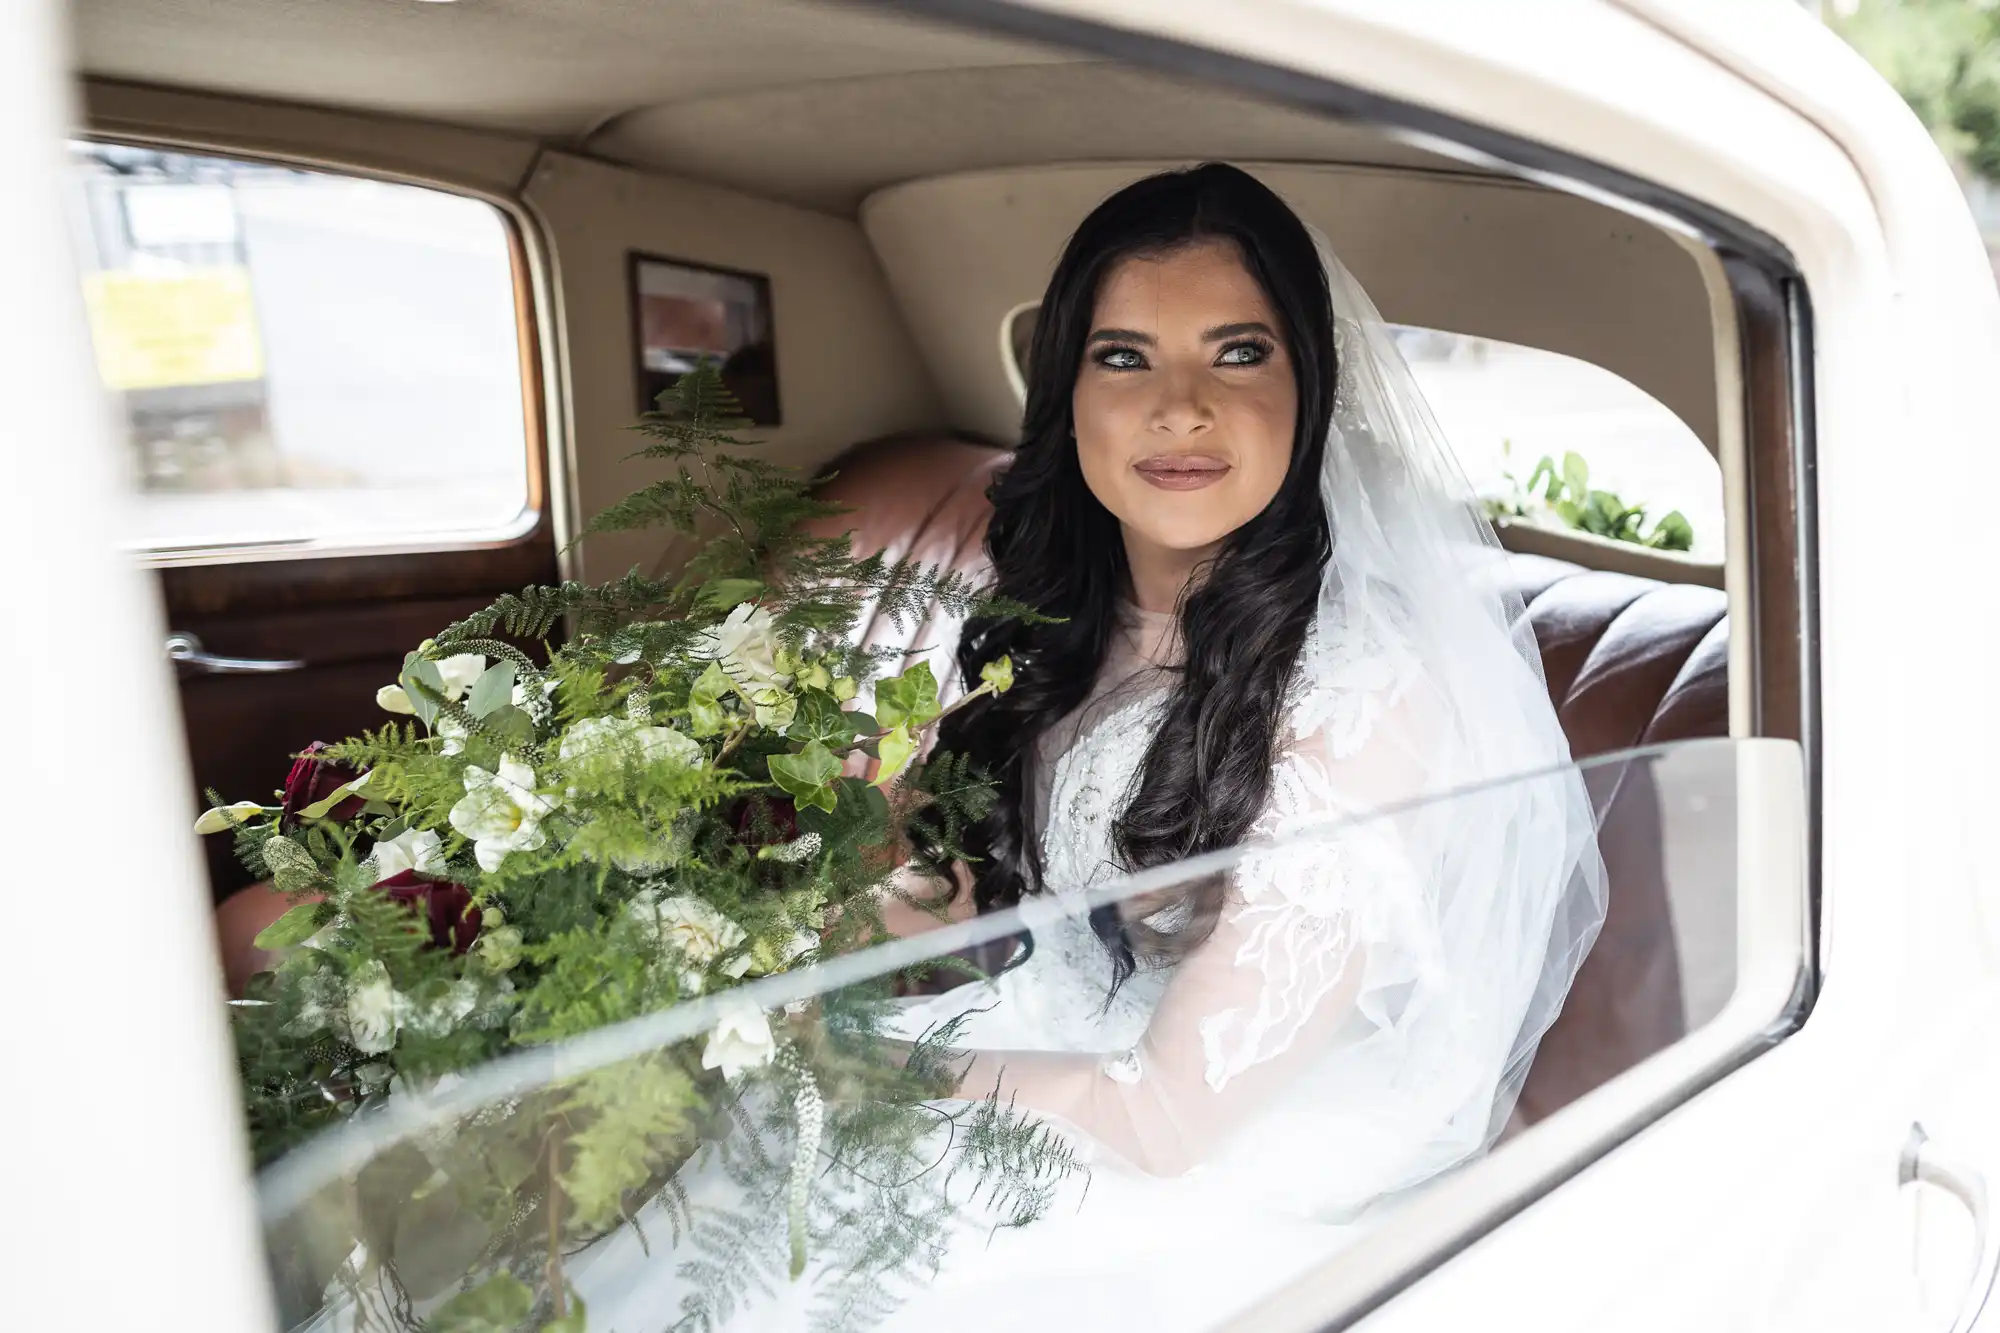 A bride holding a bouquet looks out from the window of a classic car, her expression thoughtful and serene.